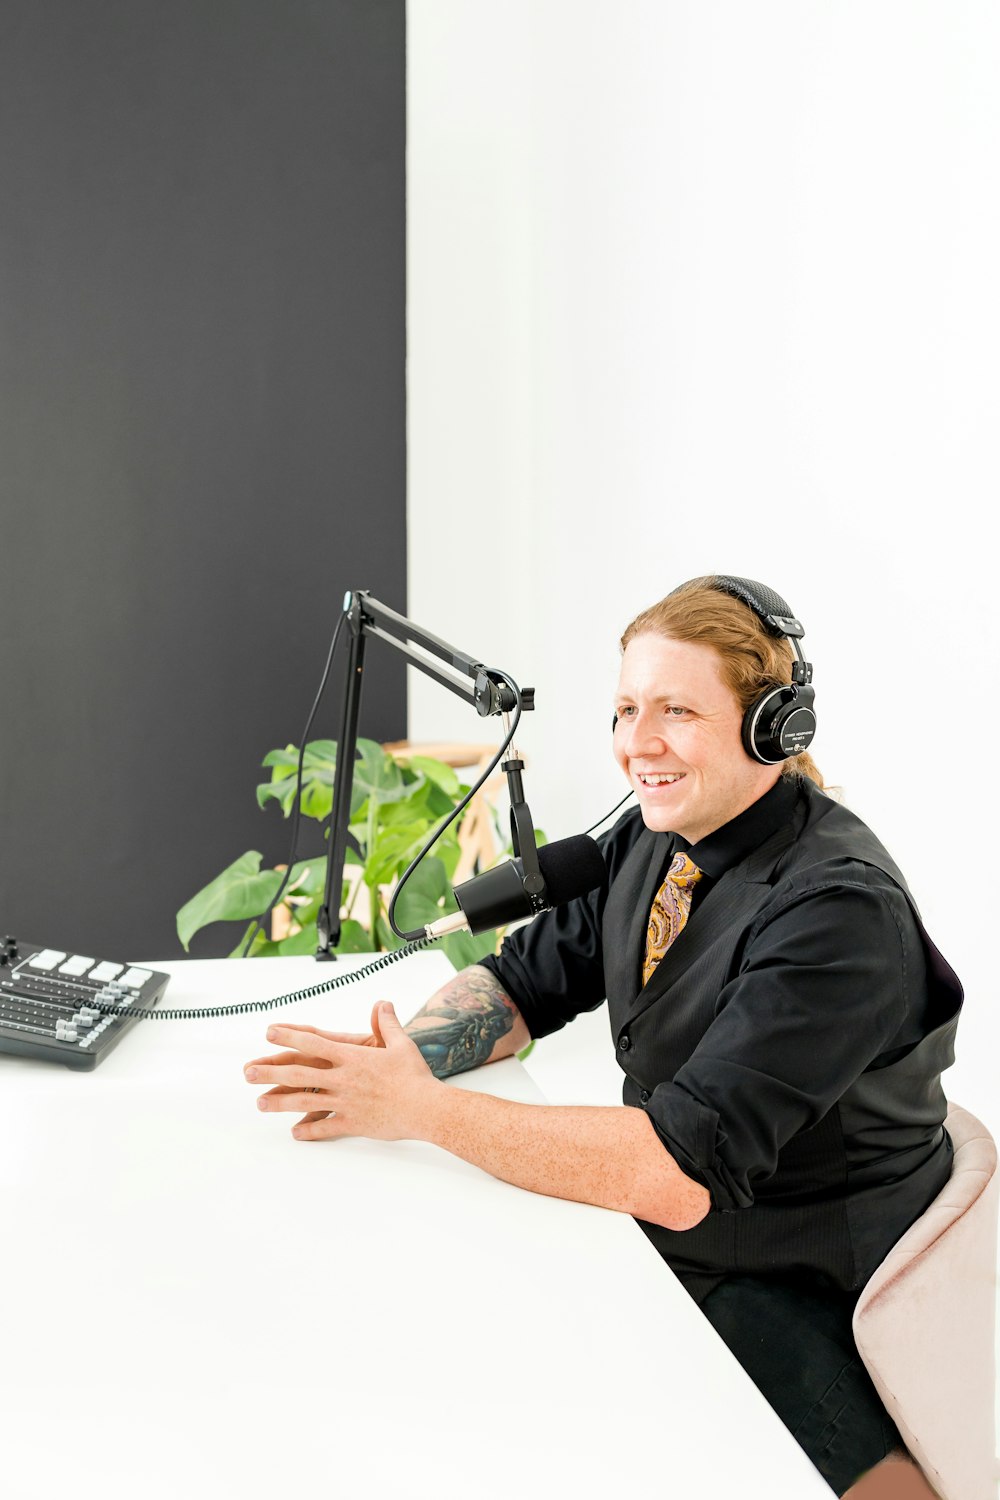 a person wearing headphones and sitting at a desk with a microphone